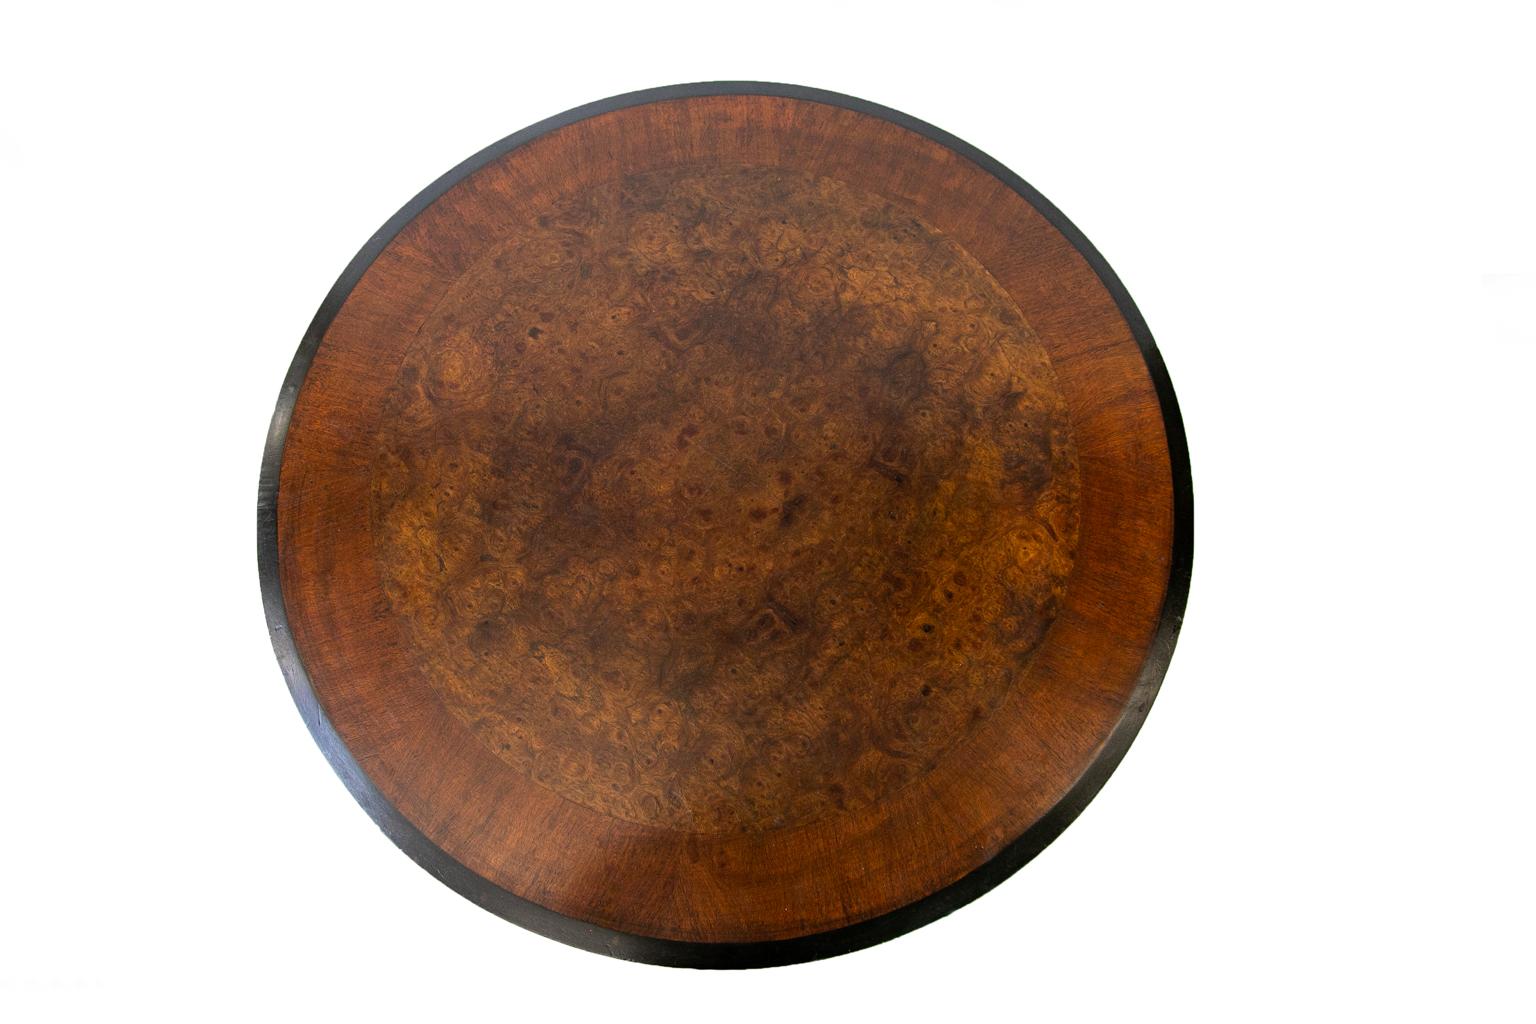 English walnut pedestal center table, the top having bookmatched burl walnut veneer, is crossbanded with a three inch border, and has a beveled black edge. The top edge is also crossbanded throughout the circumference. The support pedestal is